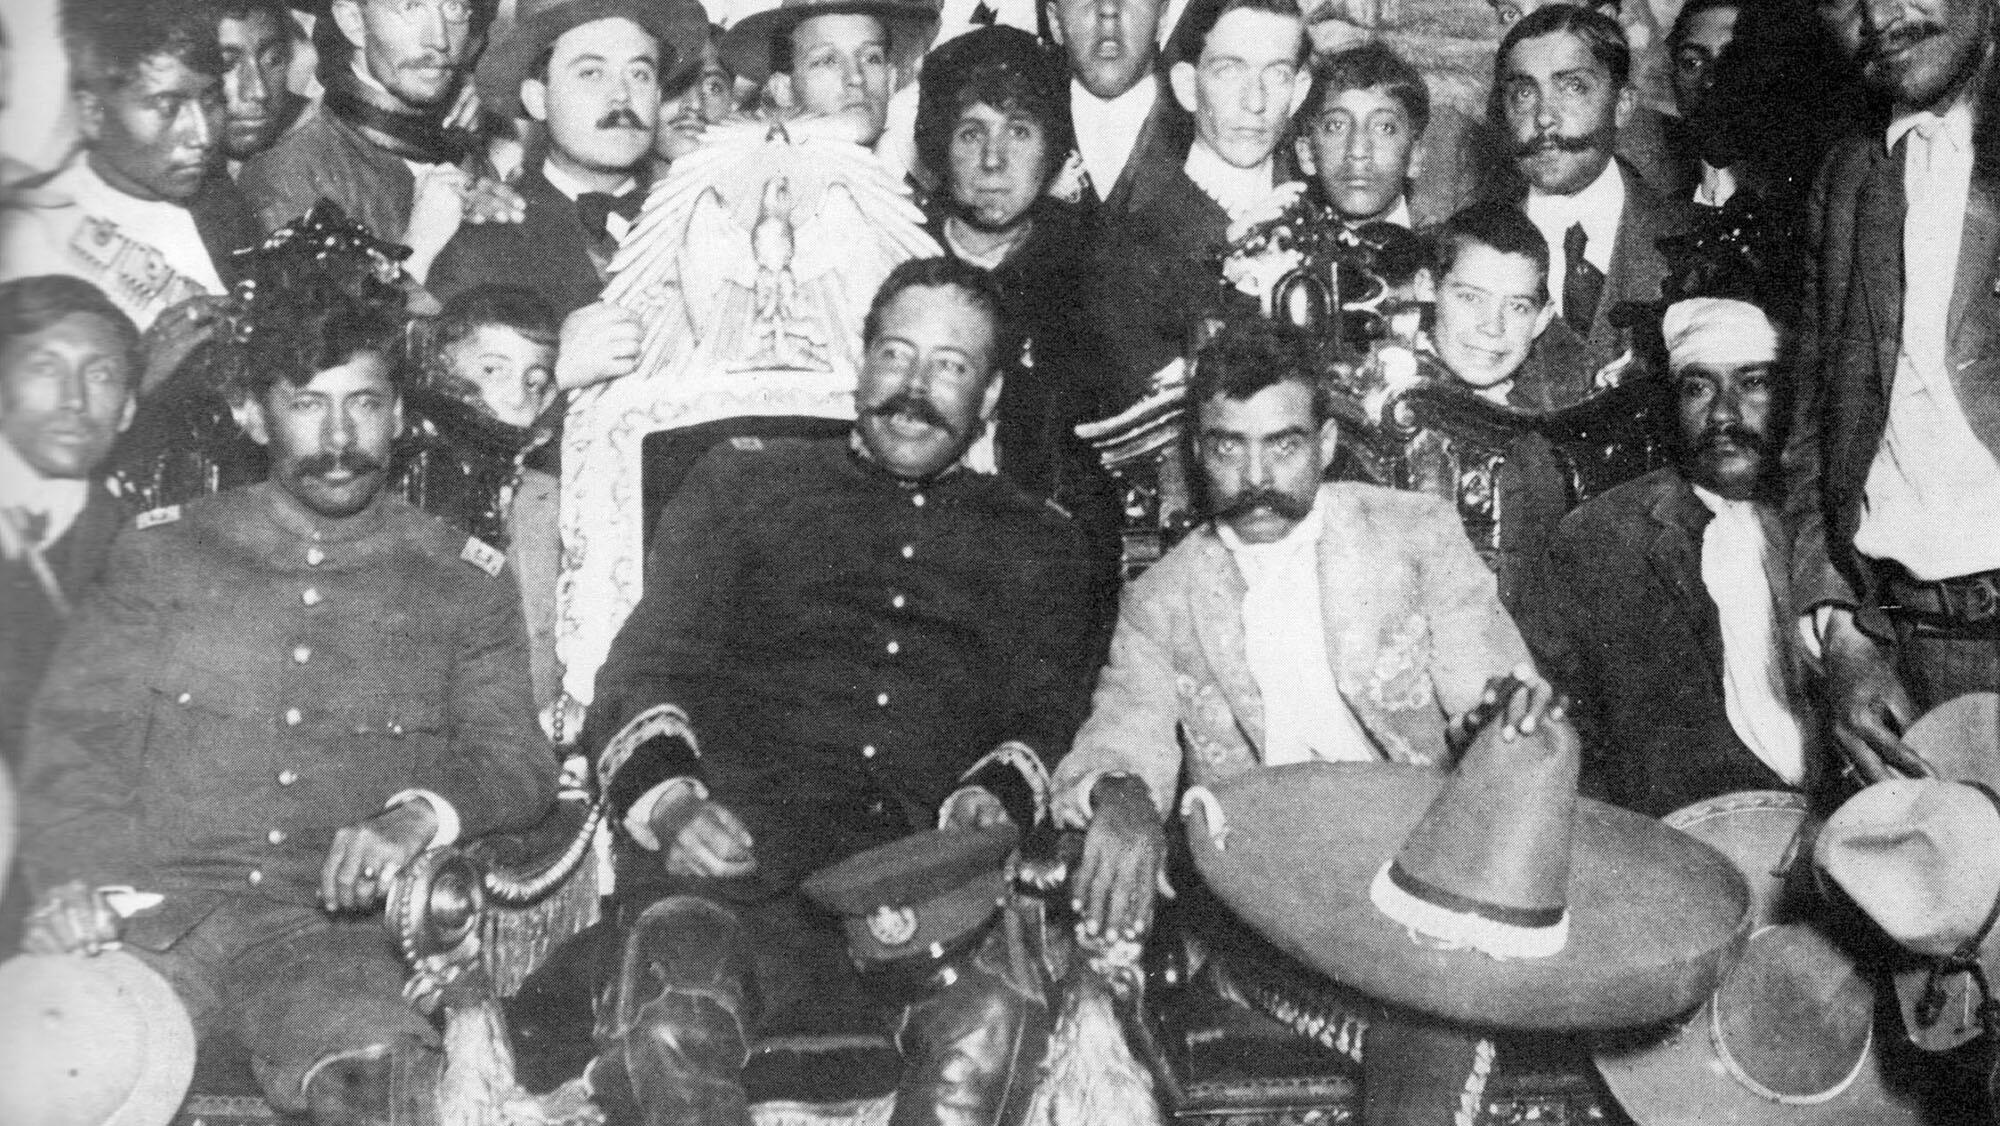 Pancho Villa (in the presidential chair) with Emiliano Zapata and supporters in Mexico City. (Photo courtesy of the Library of Congress.)